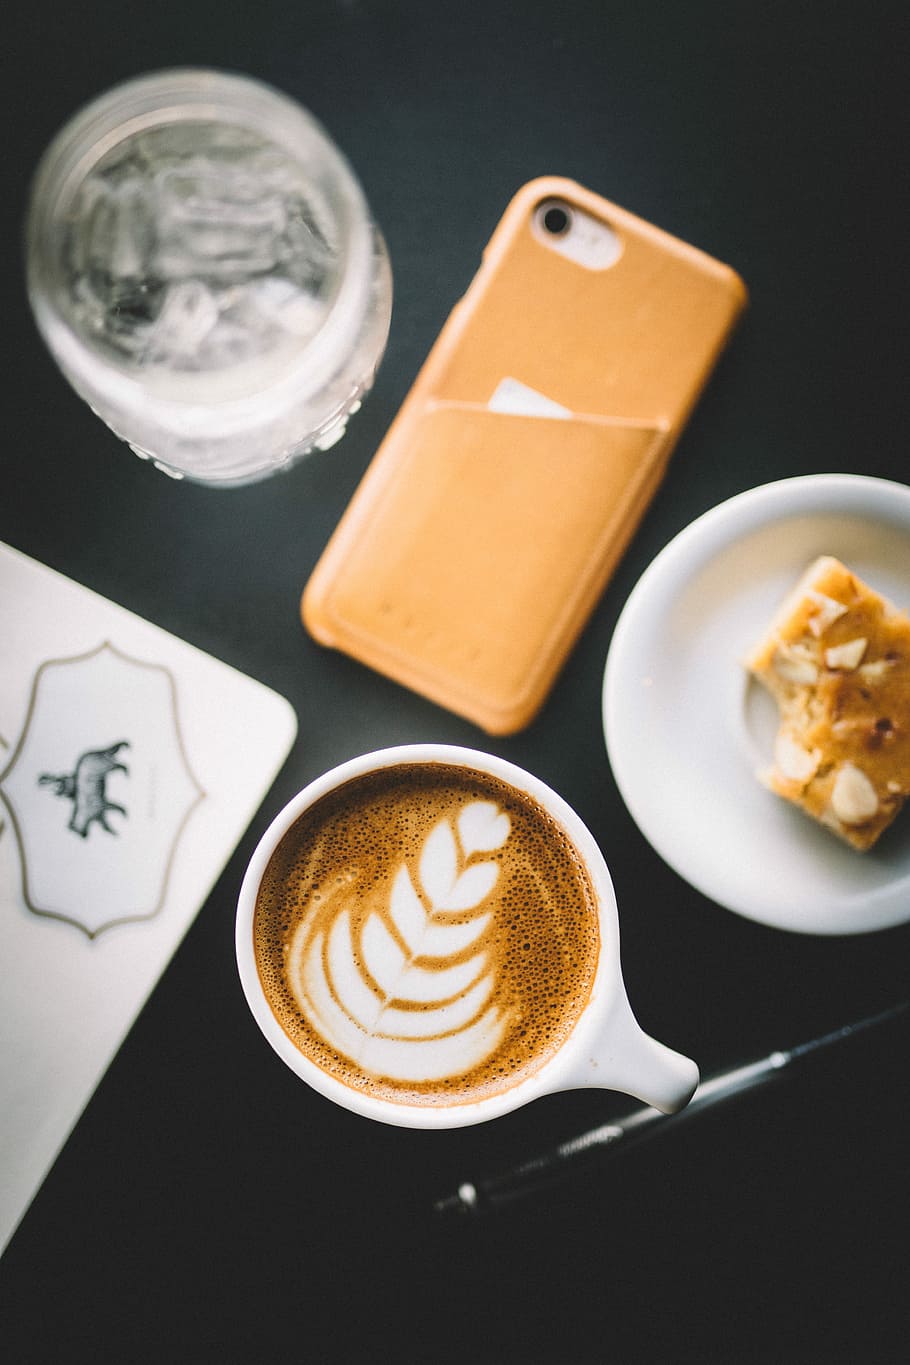 selective focus photo of cup of cappuccino beside smartphone, saucer, and glass, flat-way photography of latte on cup beside iPhone and cookie